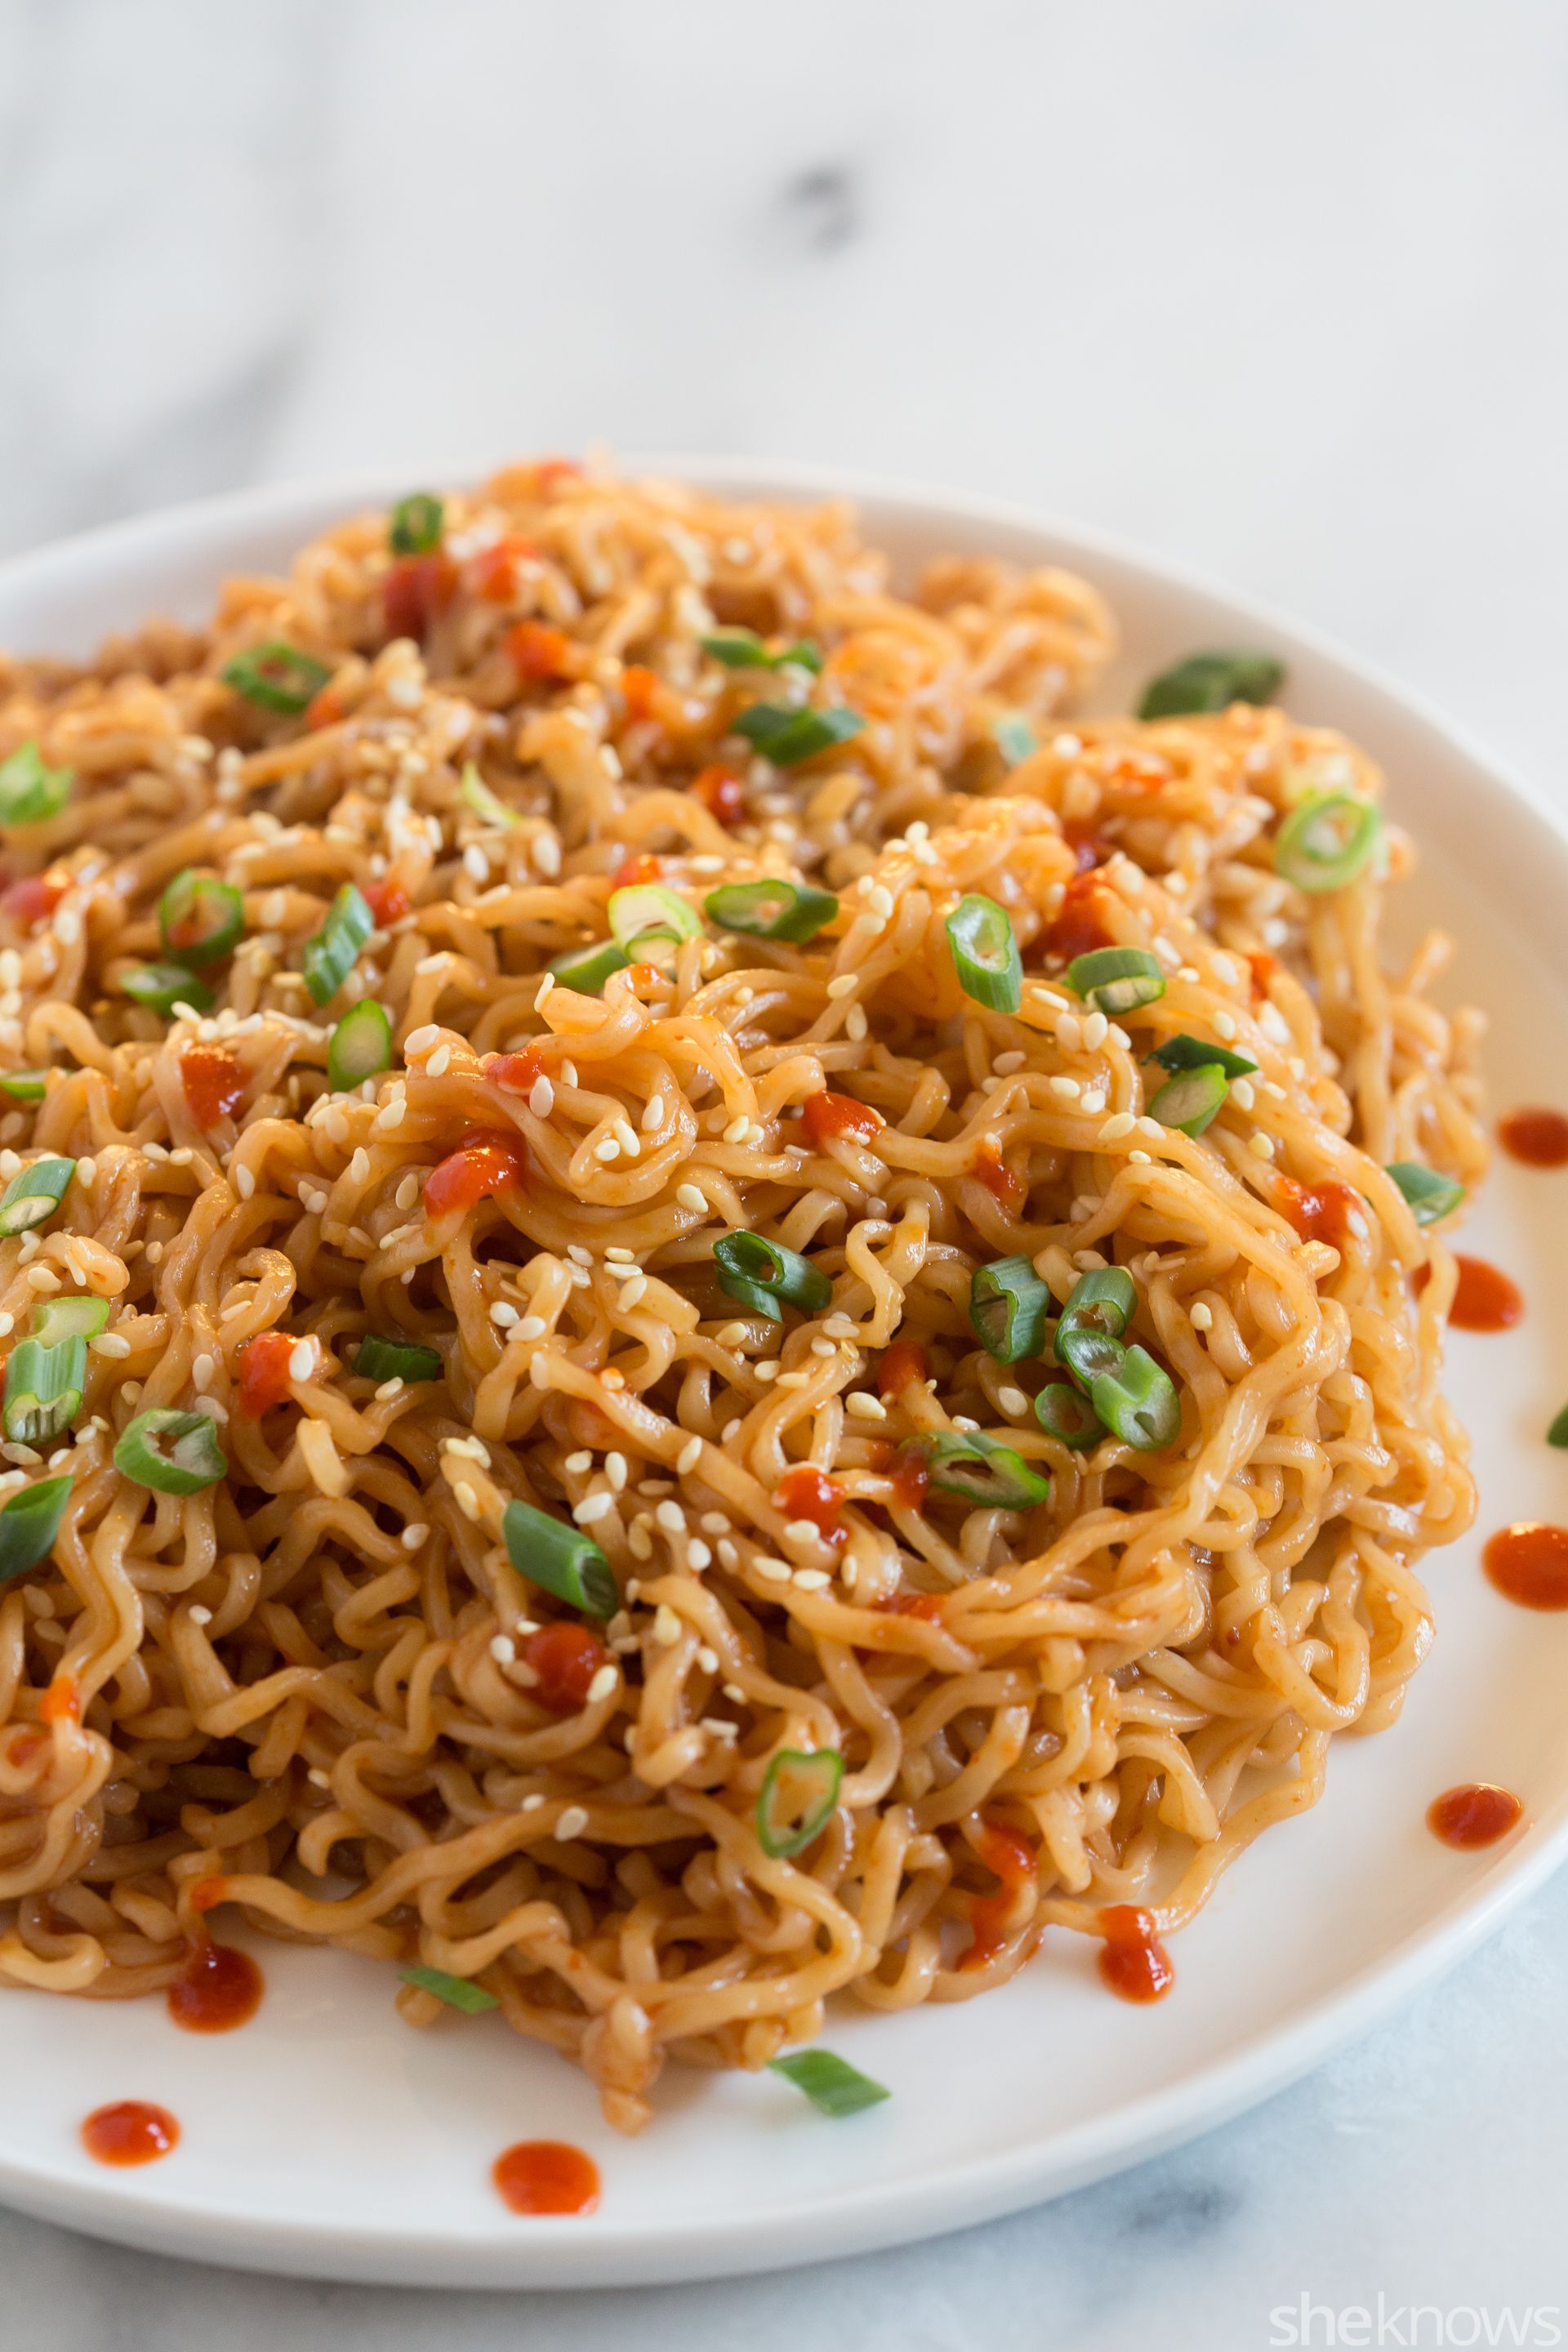 Turn packaged ramen into a drool-worthy dish with this 15-minute Sriracha sesame noodle recipe -   20 lunch recipes noodles
 ideas